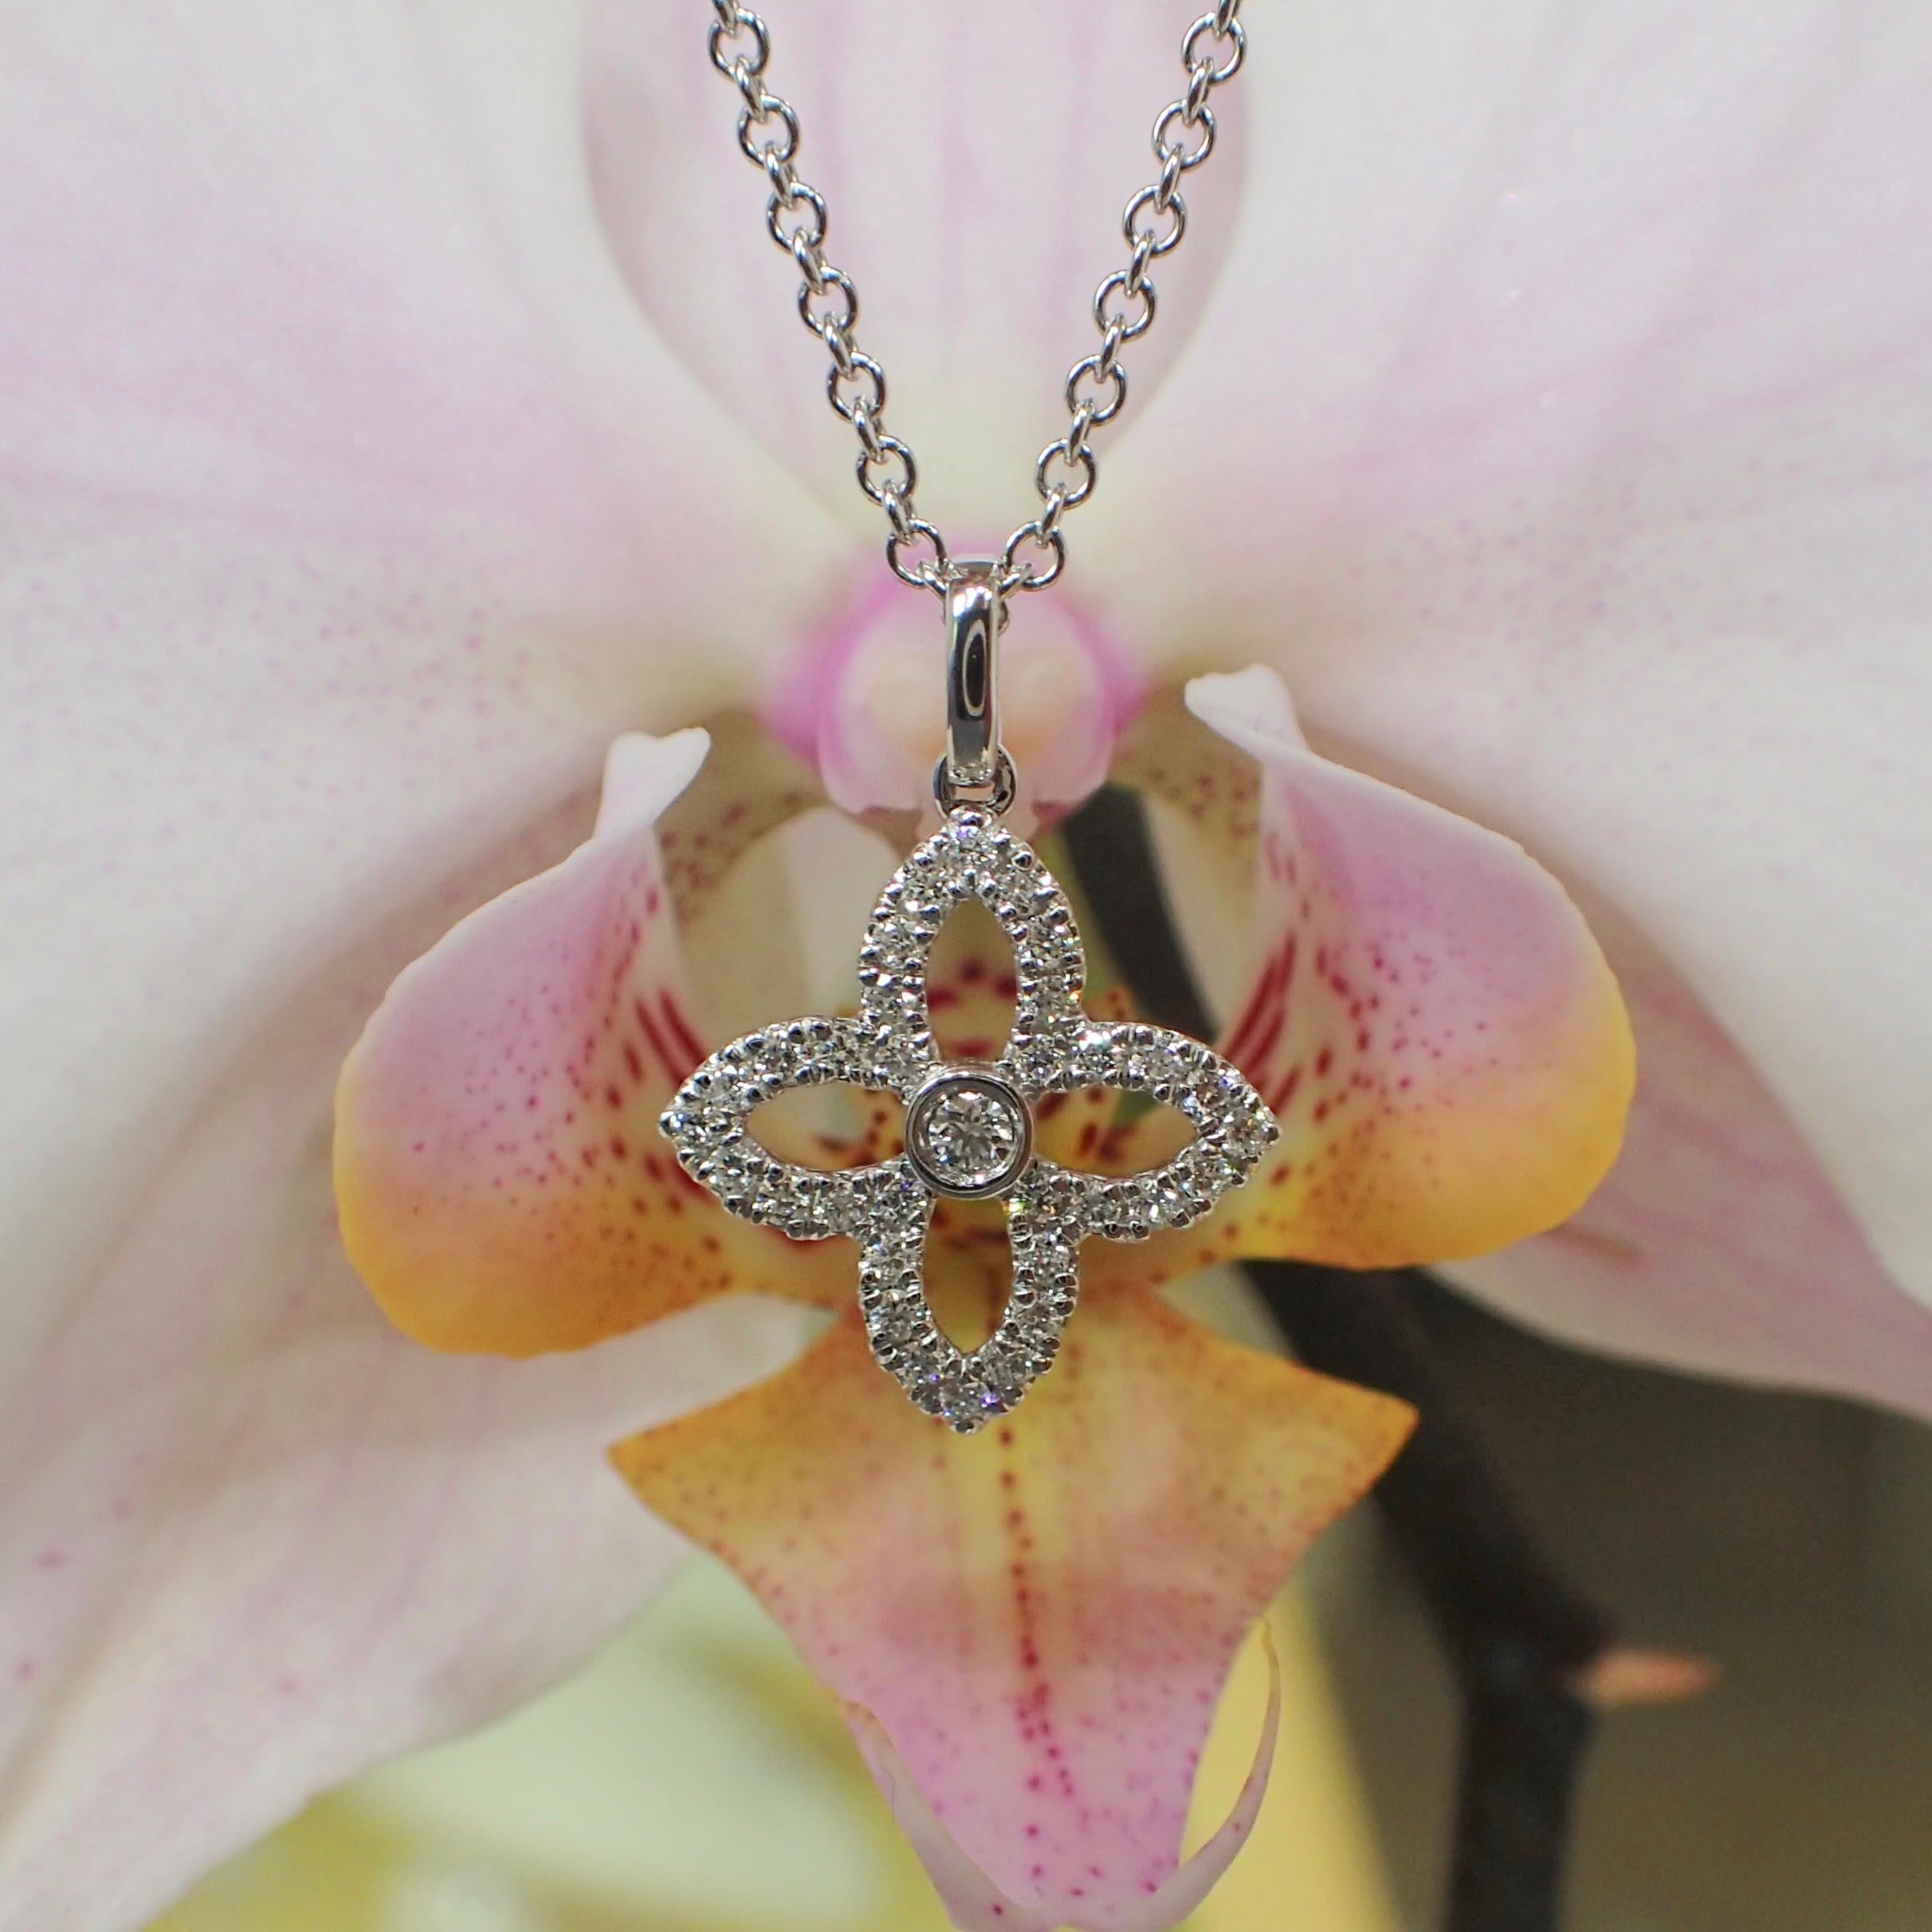 18 Karat Gold Flower Pendant with 0.19 Carat of Diamond Hangs from a Cable Chain For Sale 5